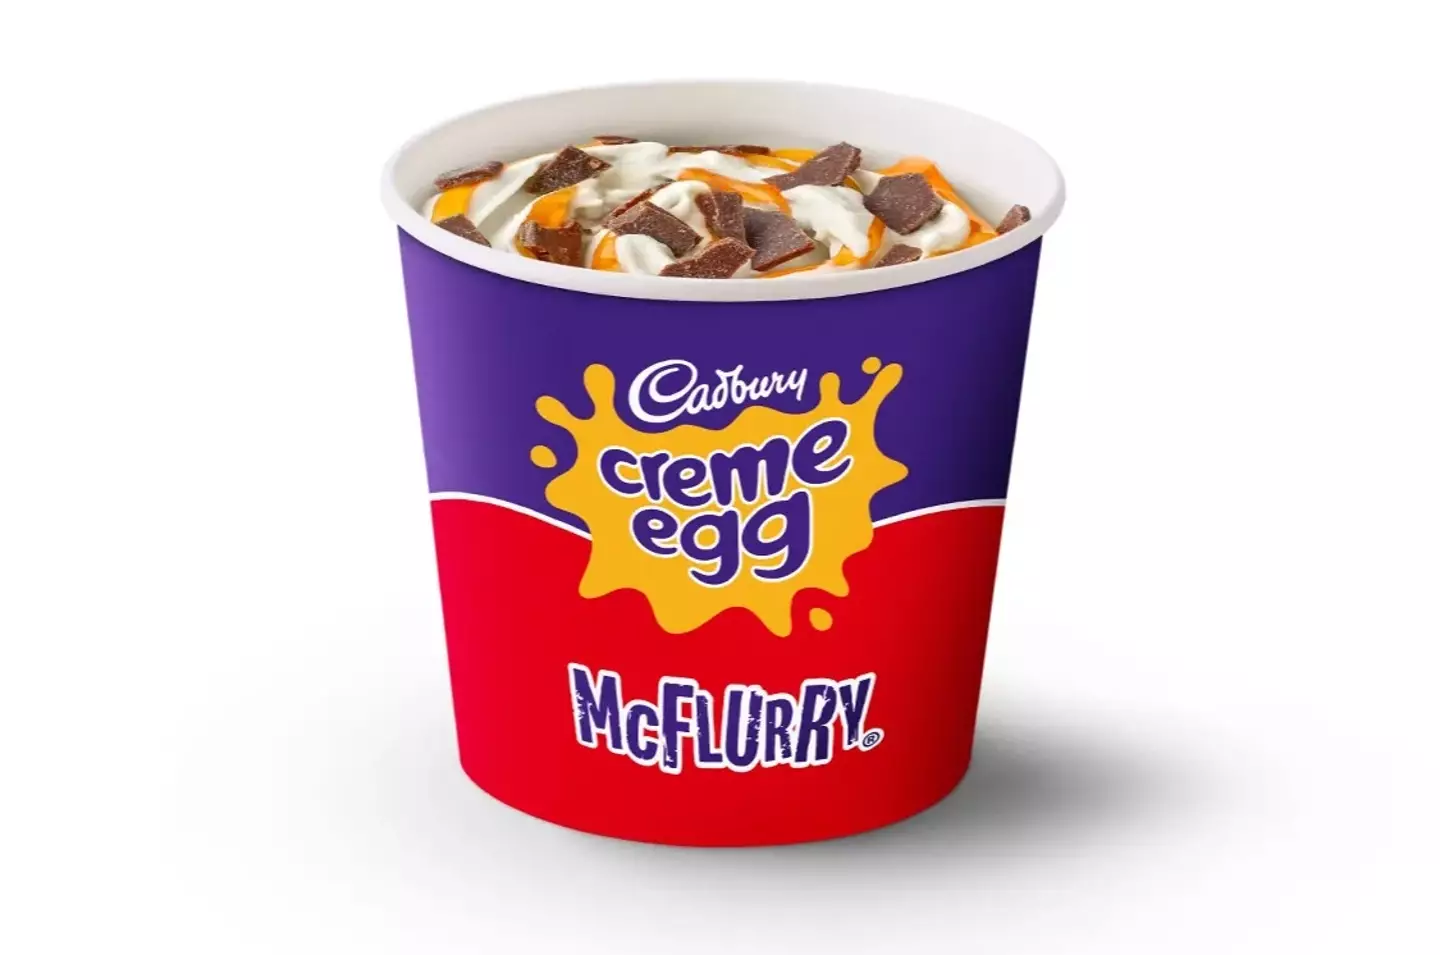 The famous Cadbury Creme Egg McFlurry is also making a comeback this Easter.